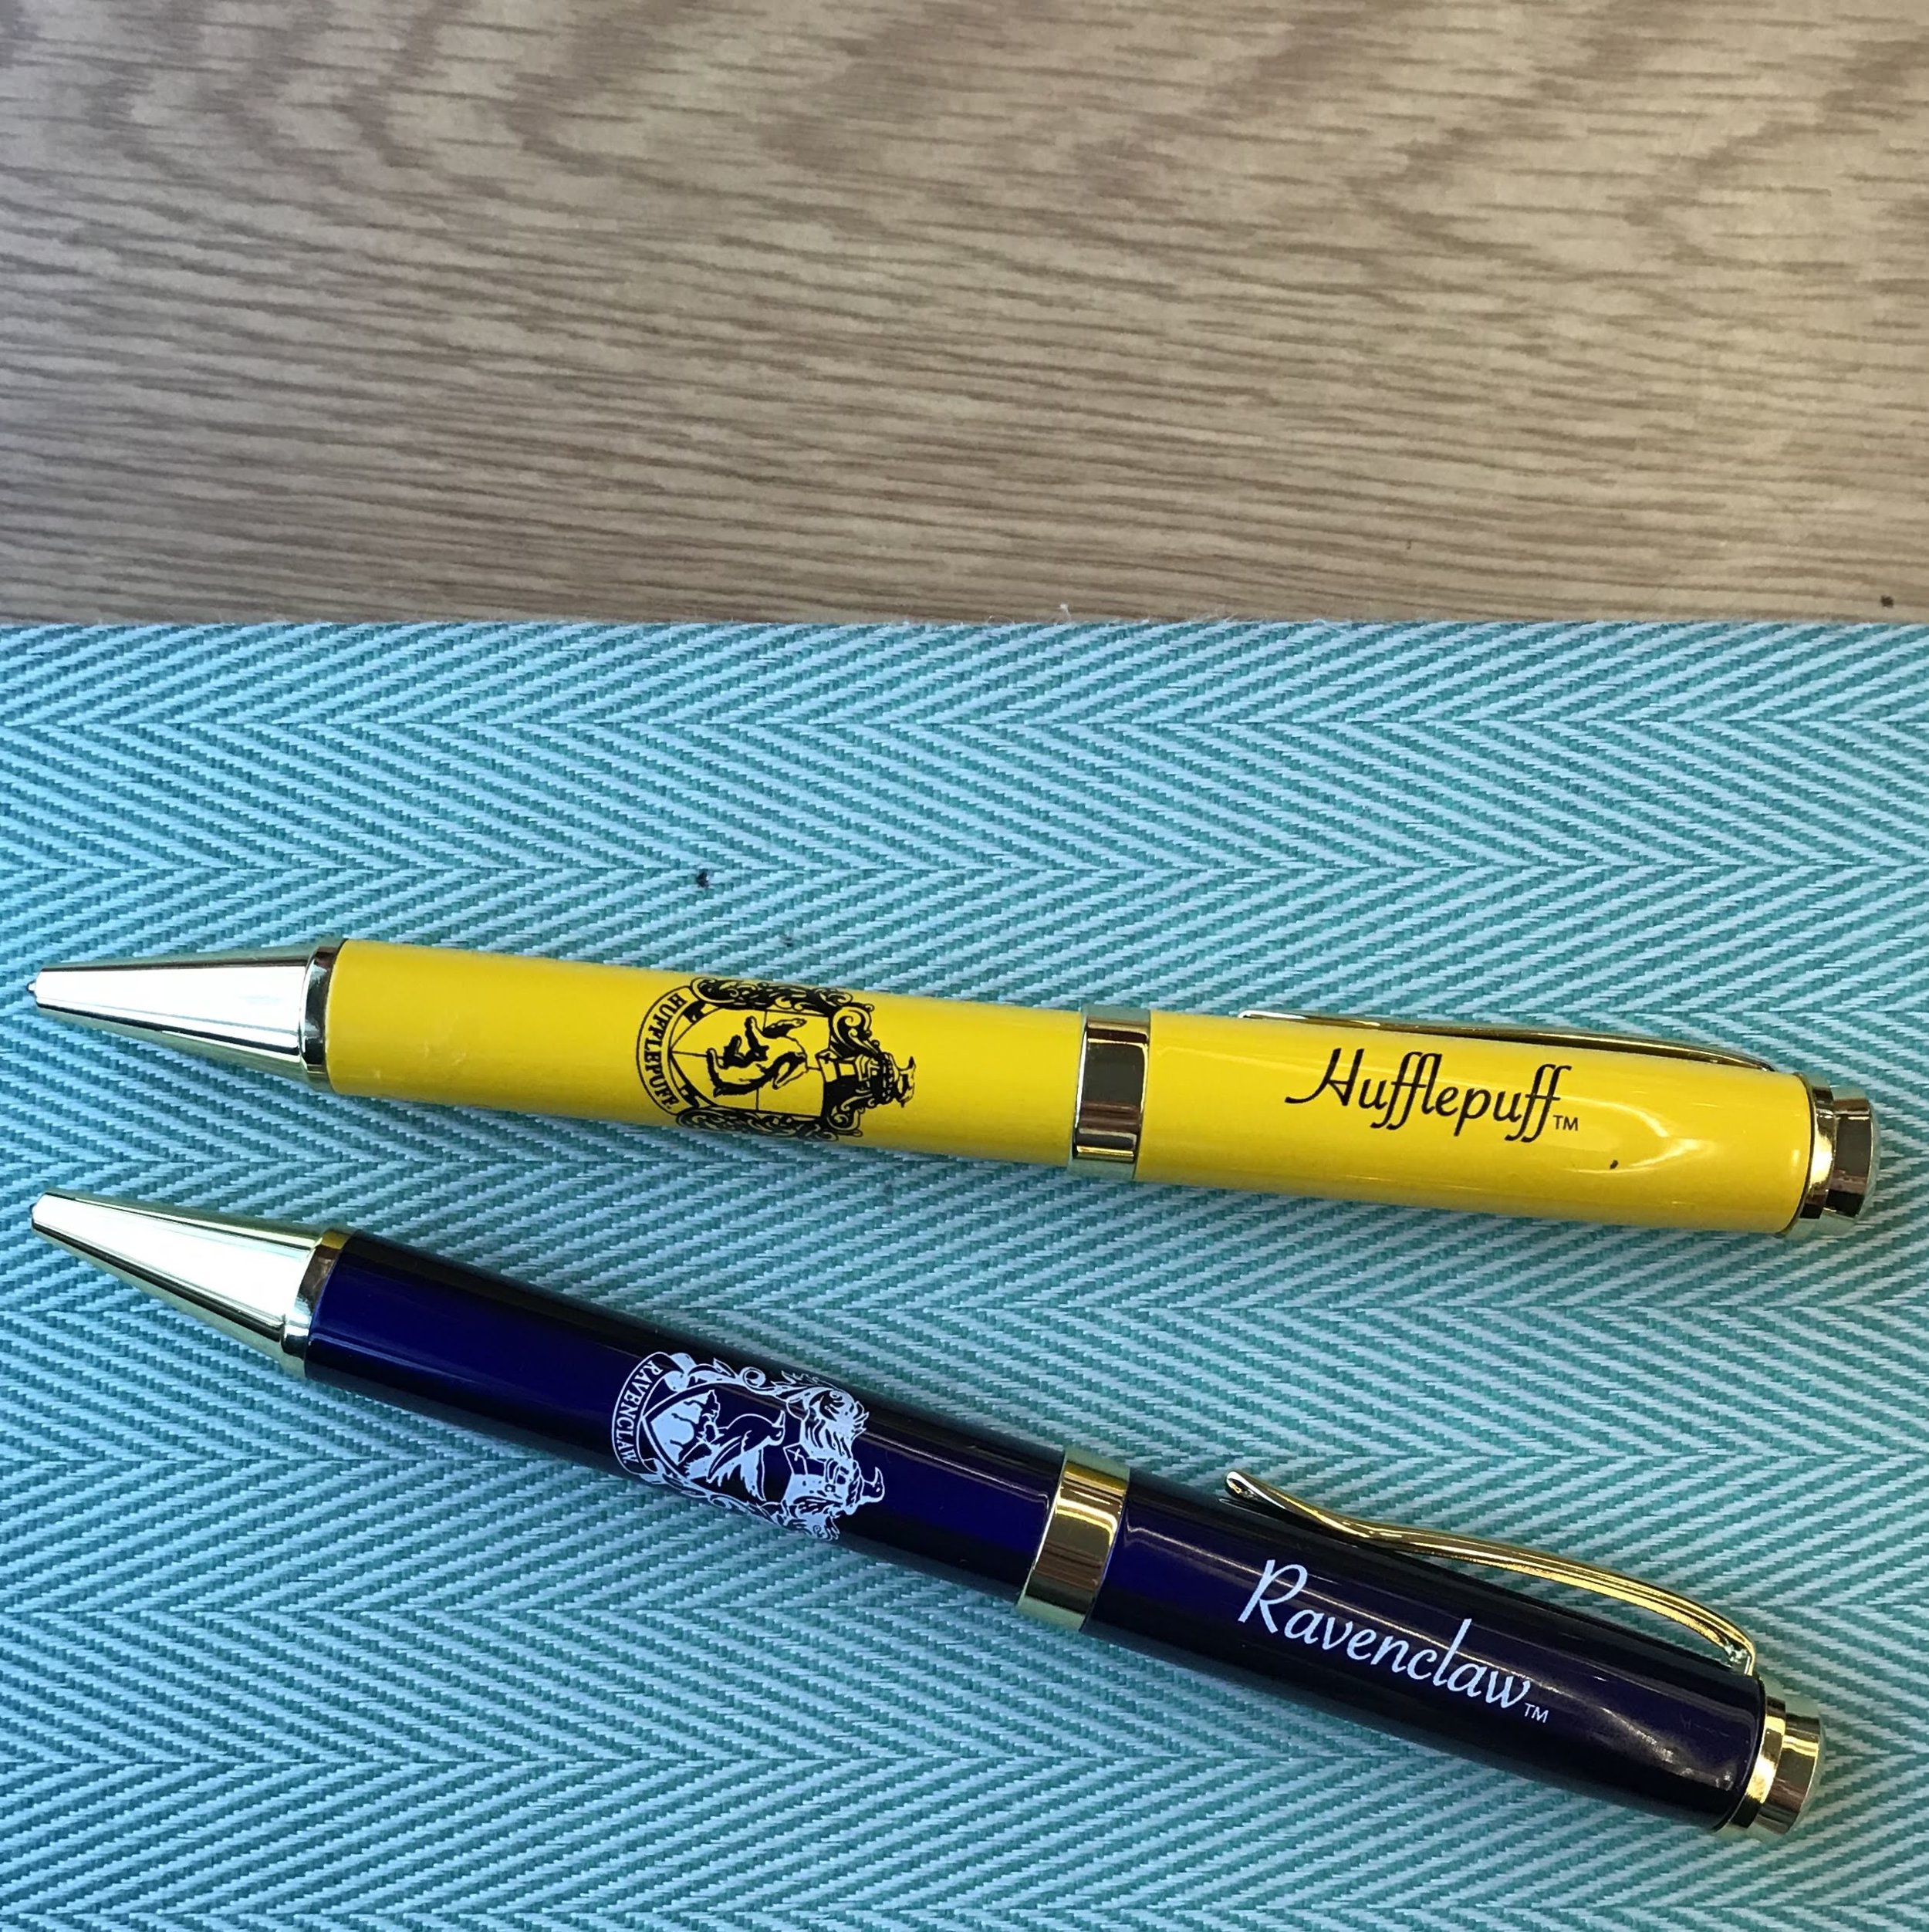 pens for each of our houses